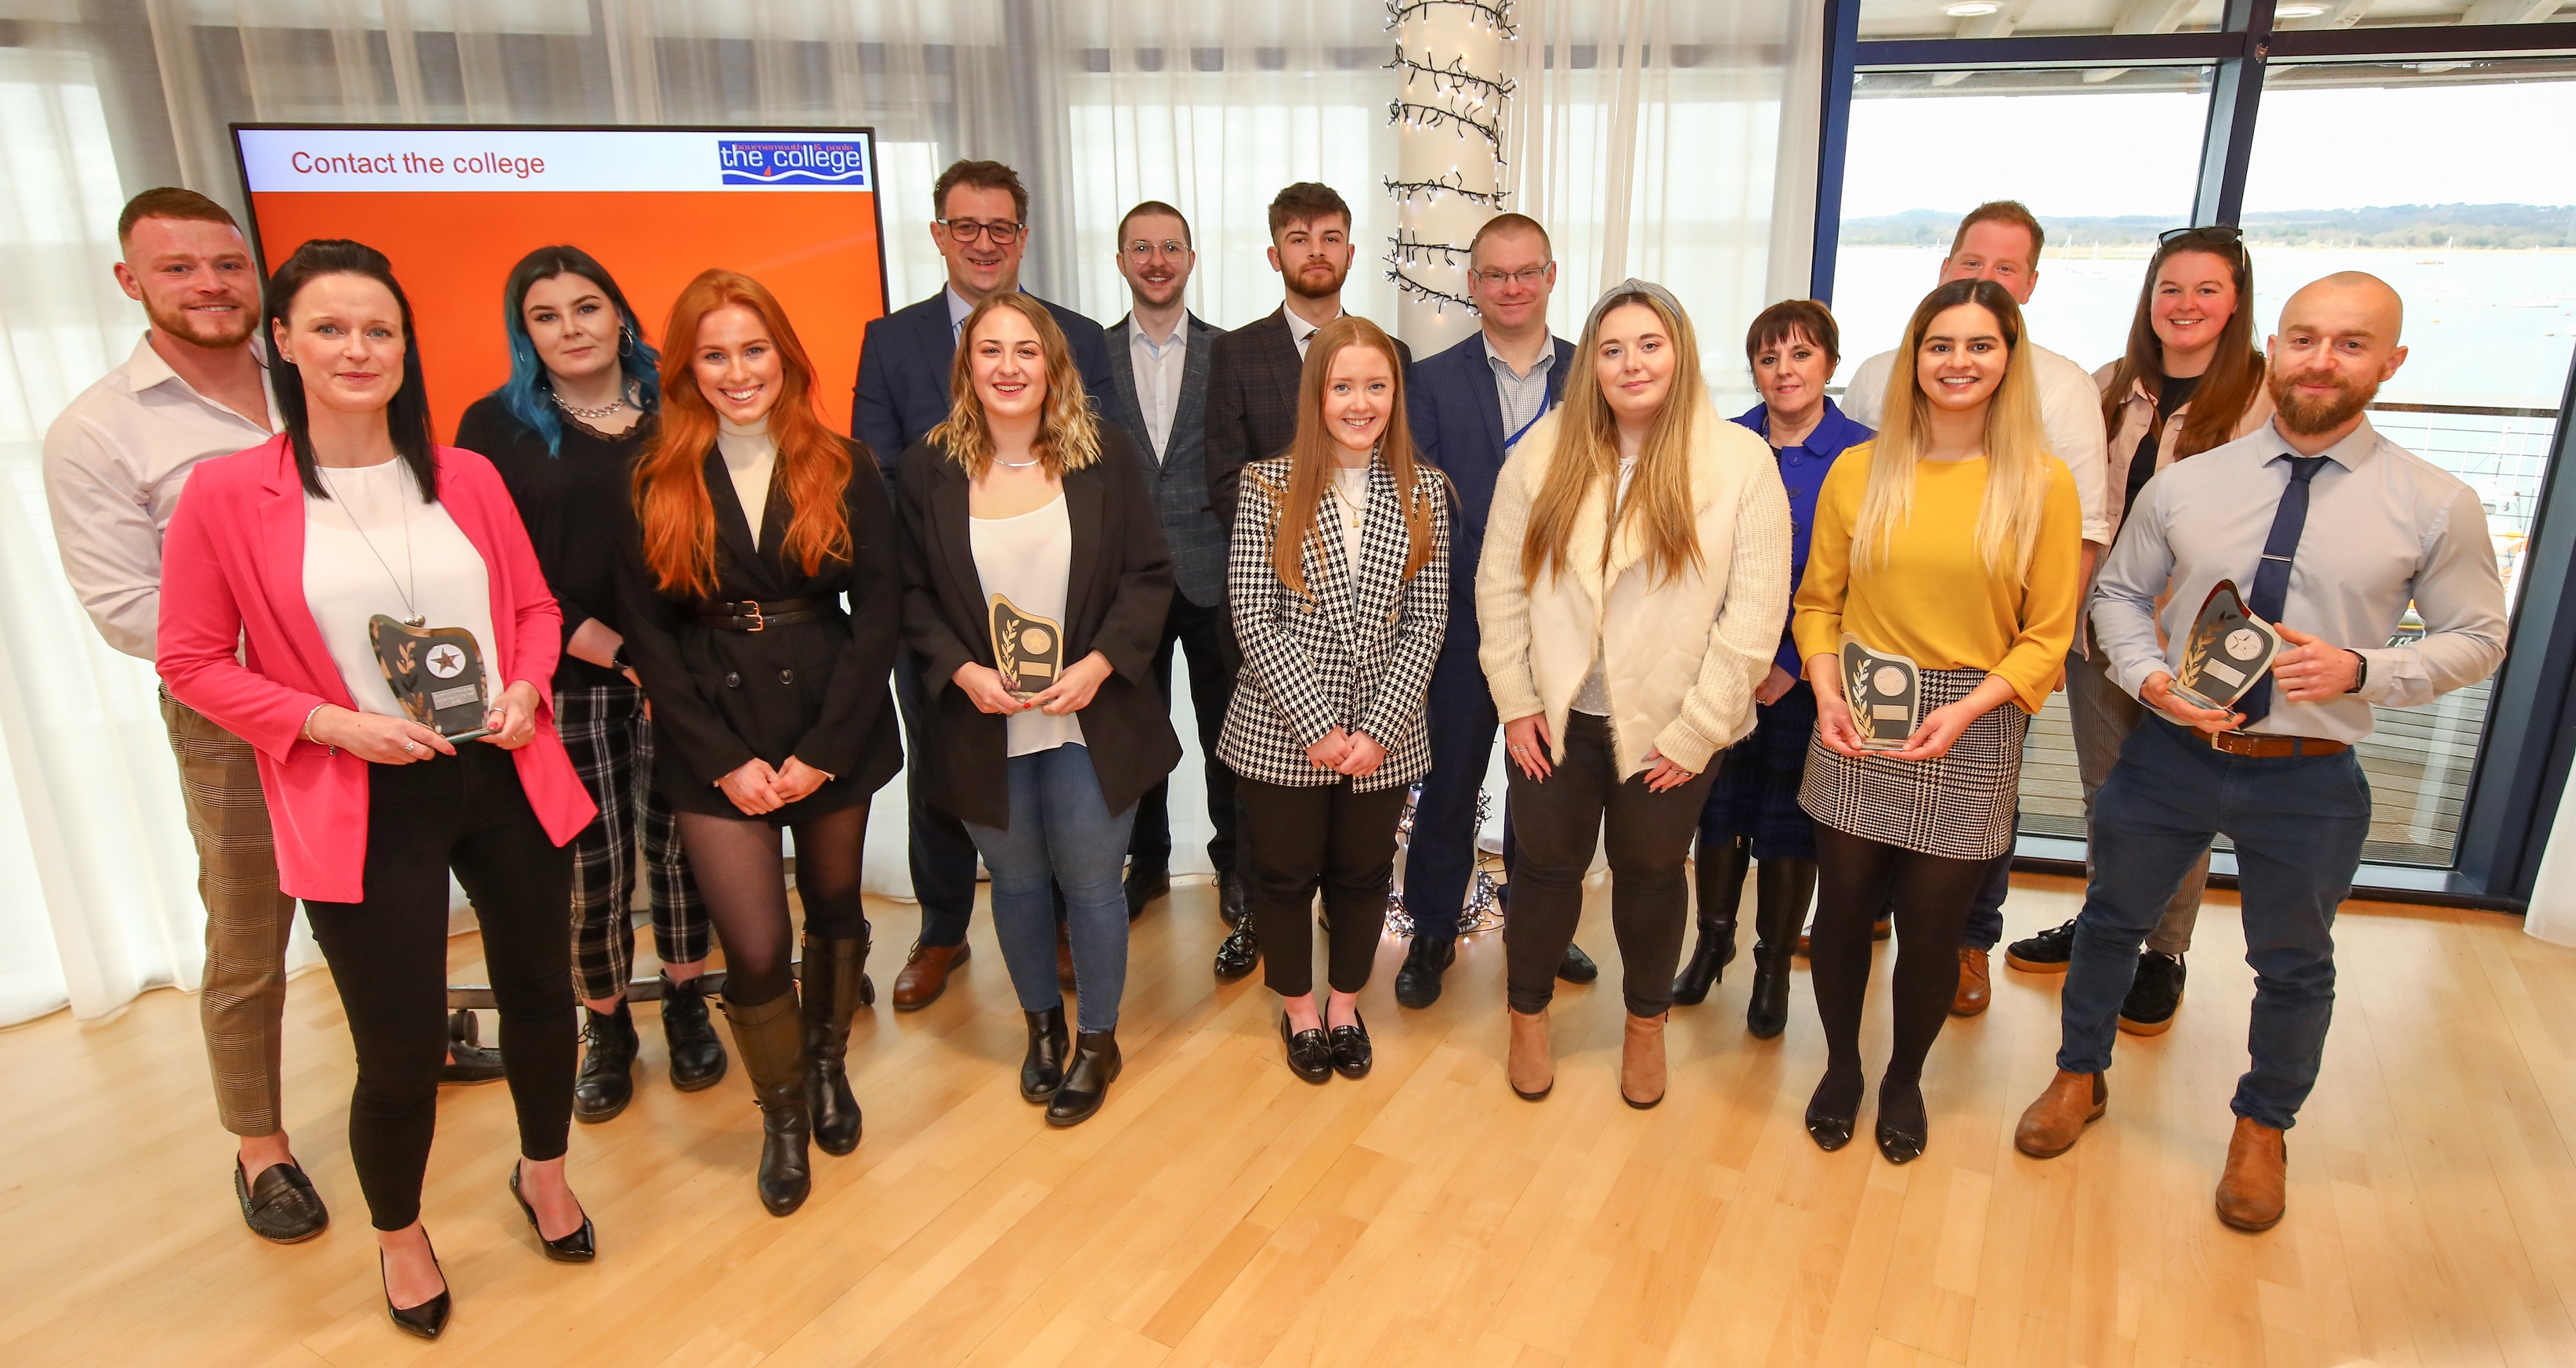 Bournemouth & Poole College celebrates apprentices after huge spike in enrolment compared to national average